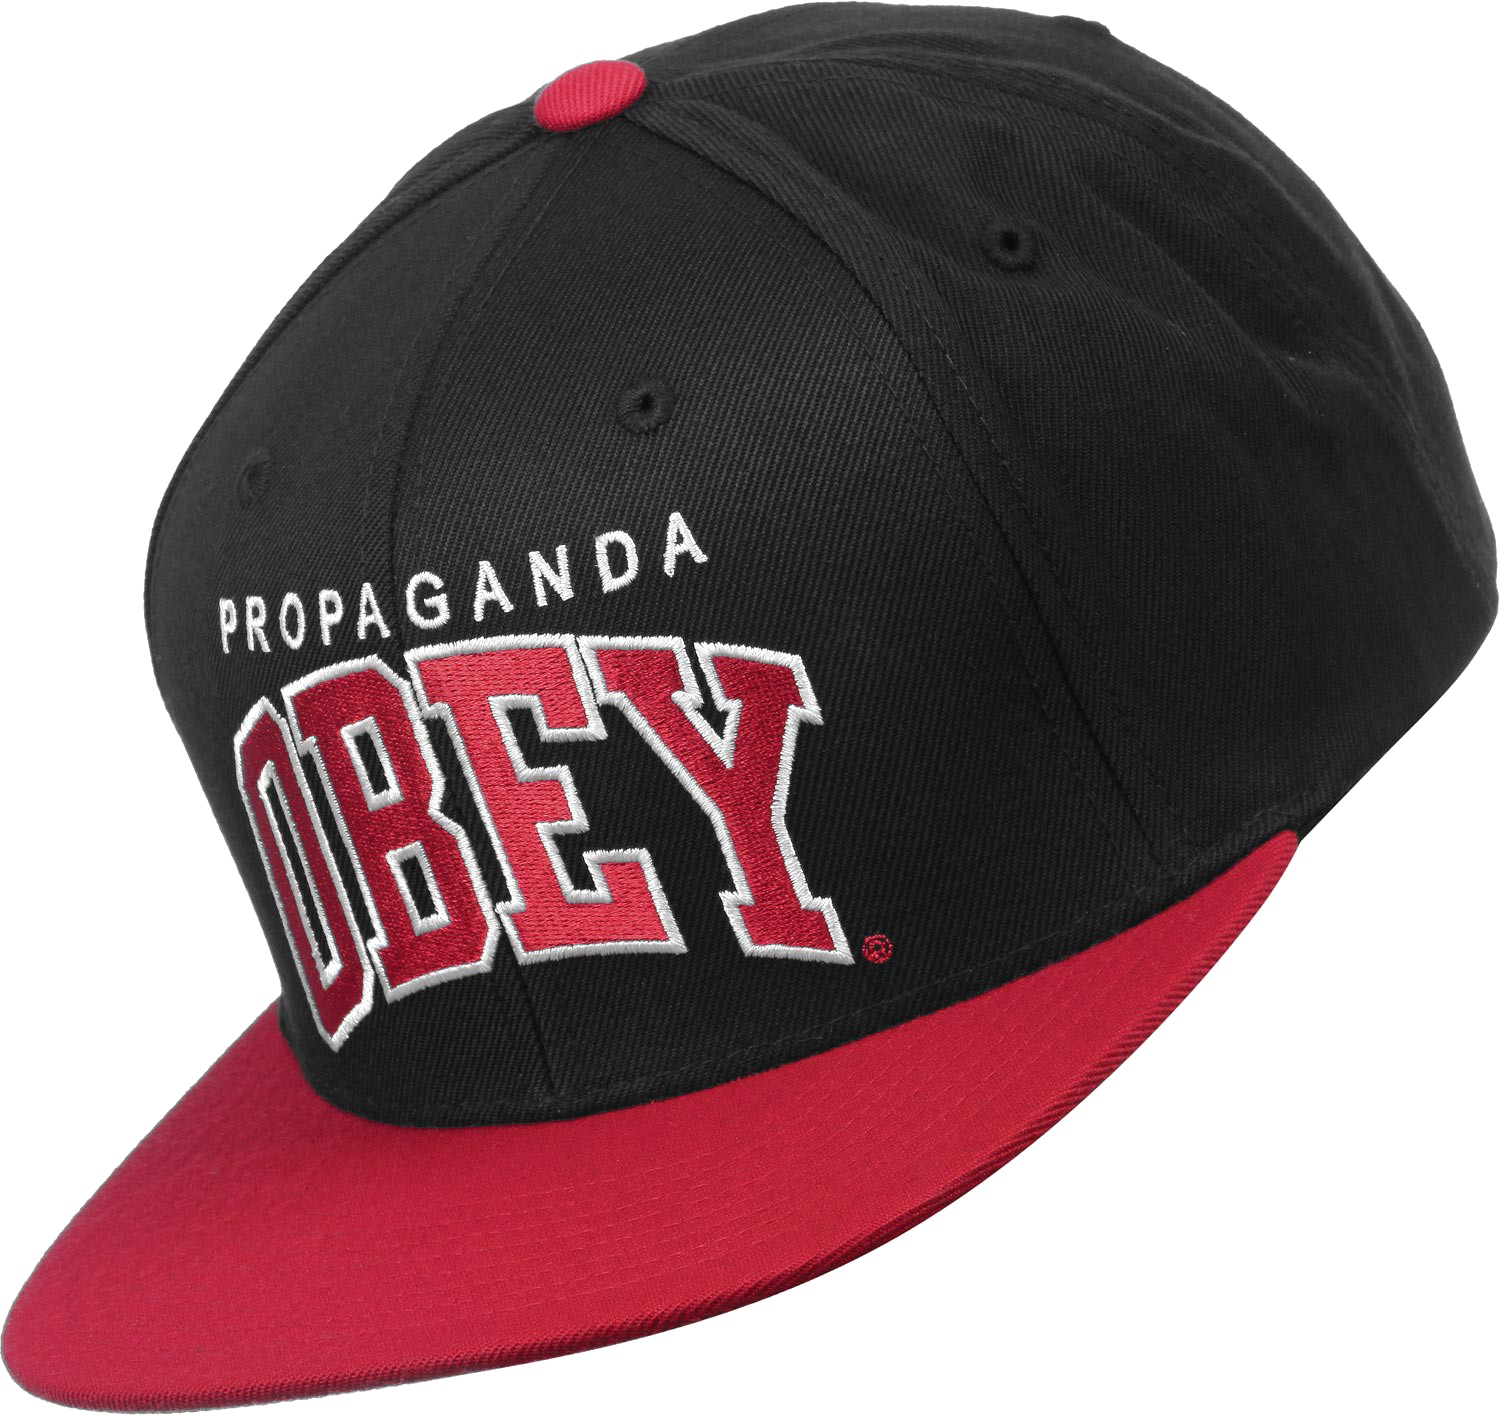 Obey Cap PNG Pic